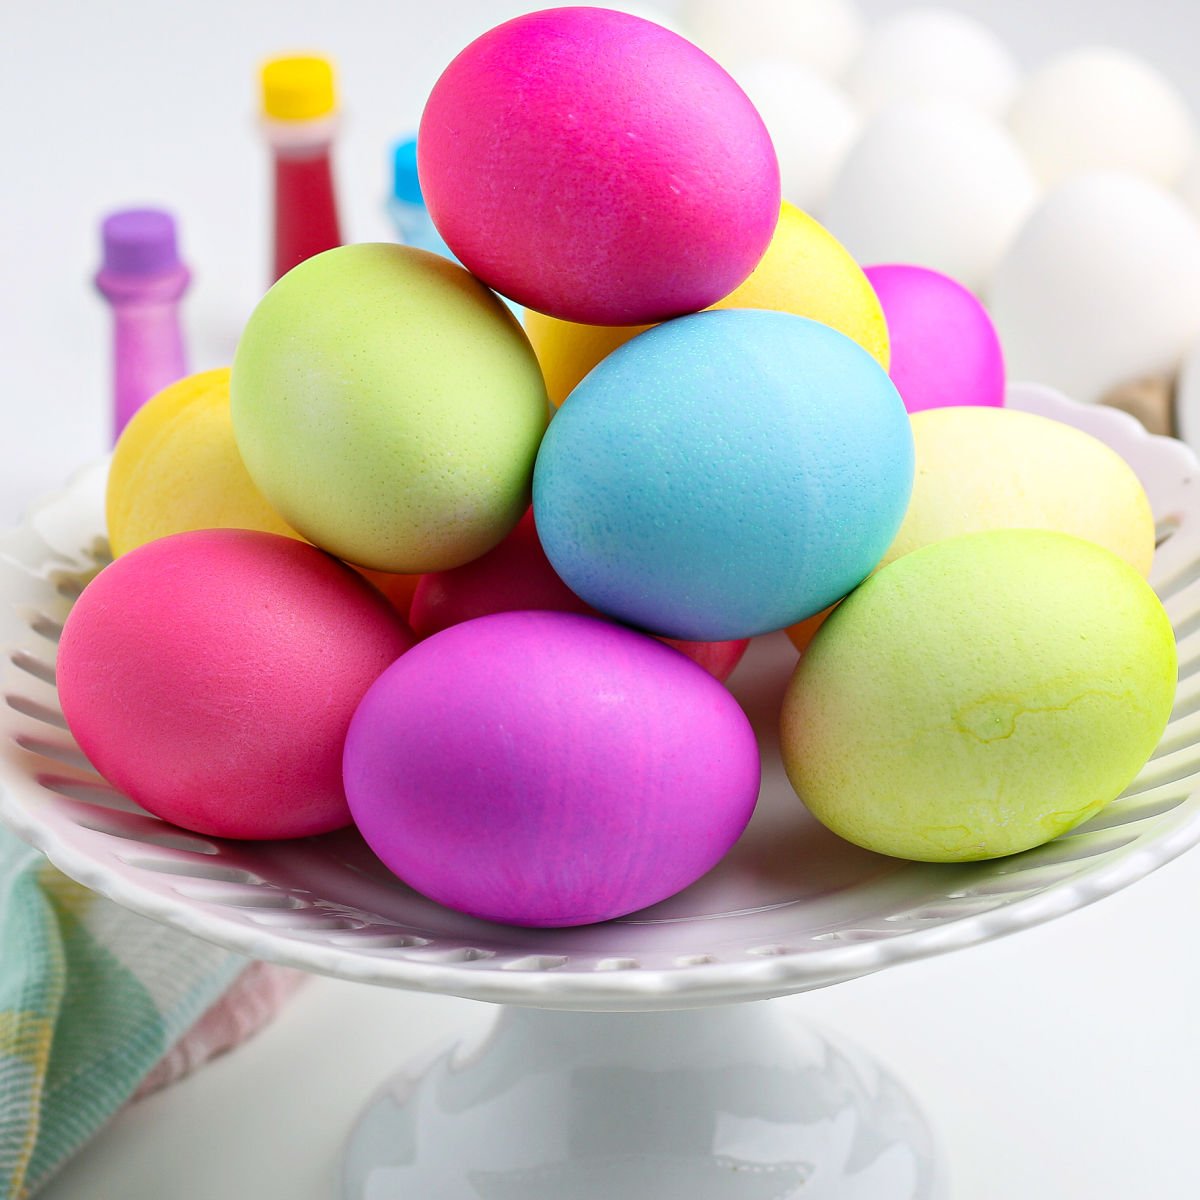 How to Dye Easter Eggs